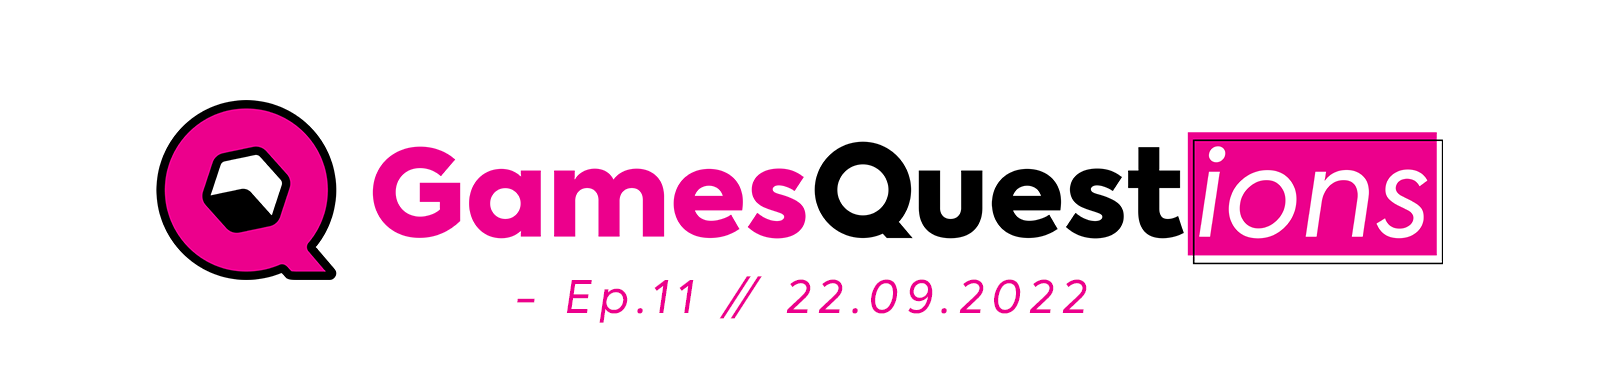 GamesQuestions Ep.11 // 22.09.2022